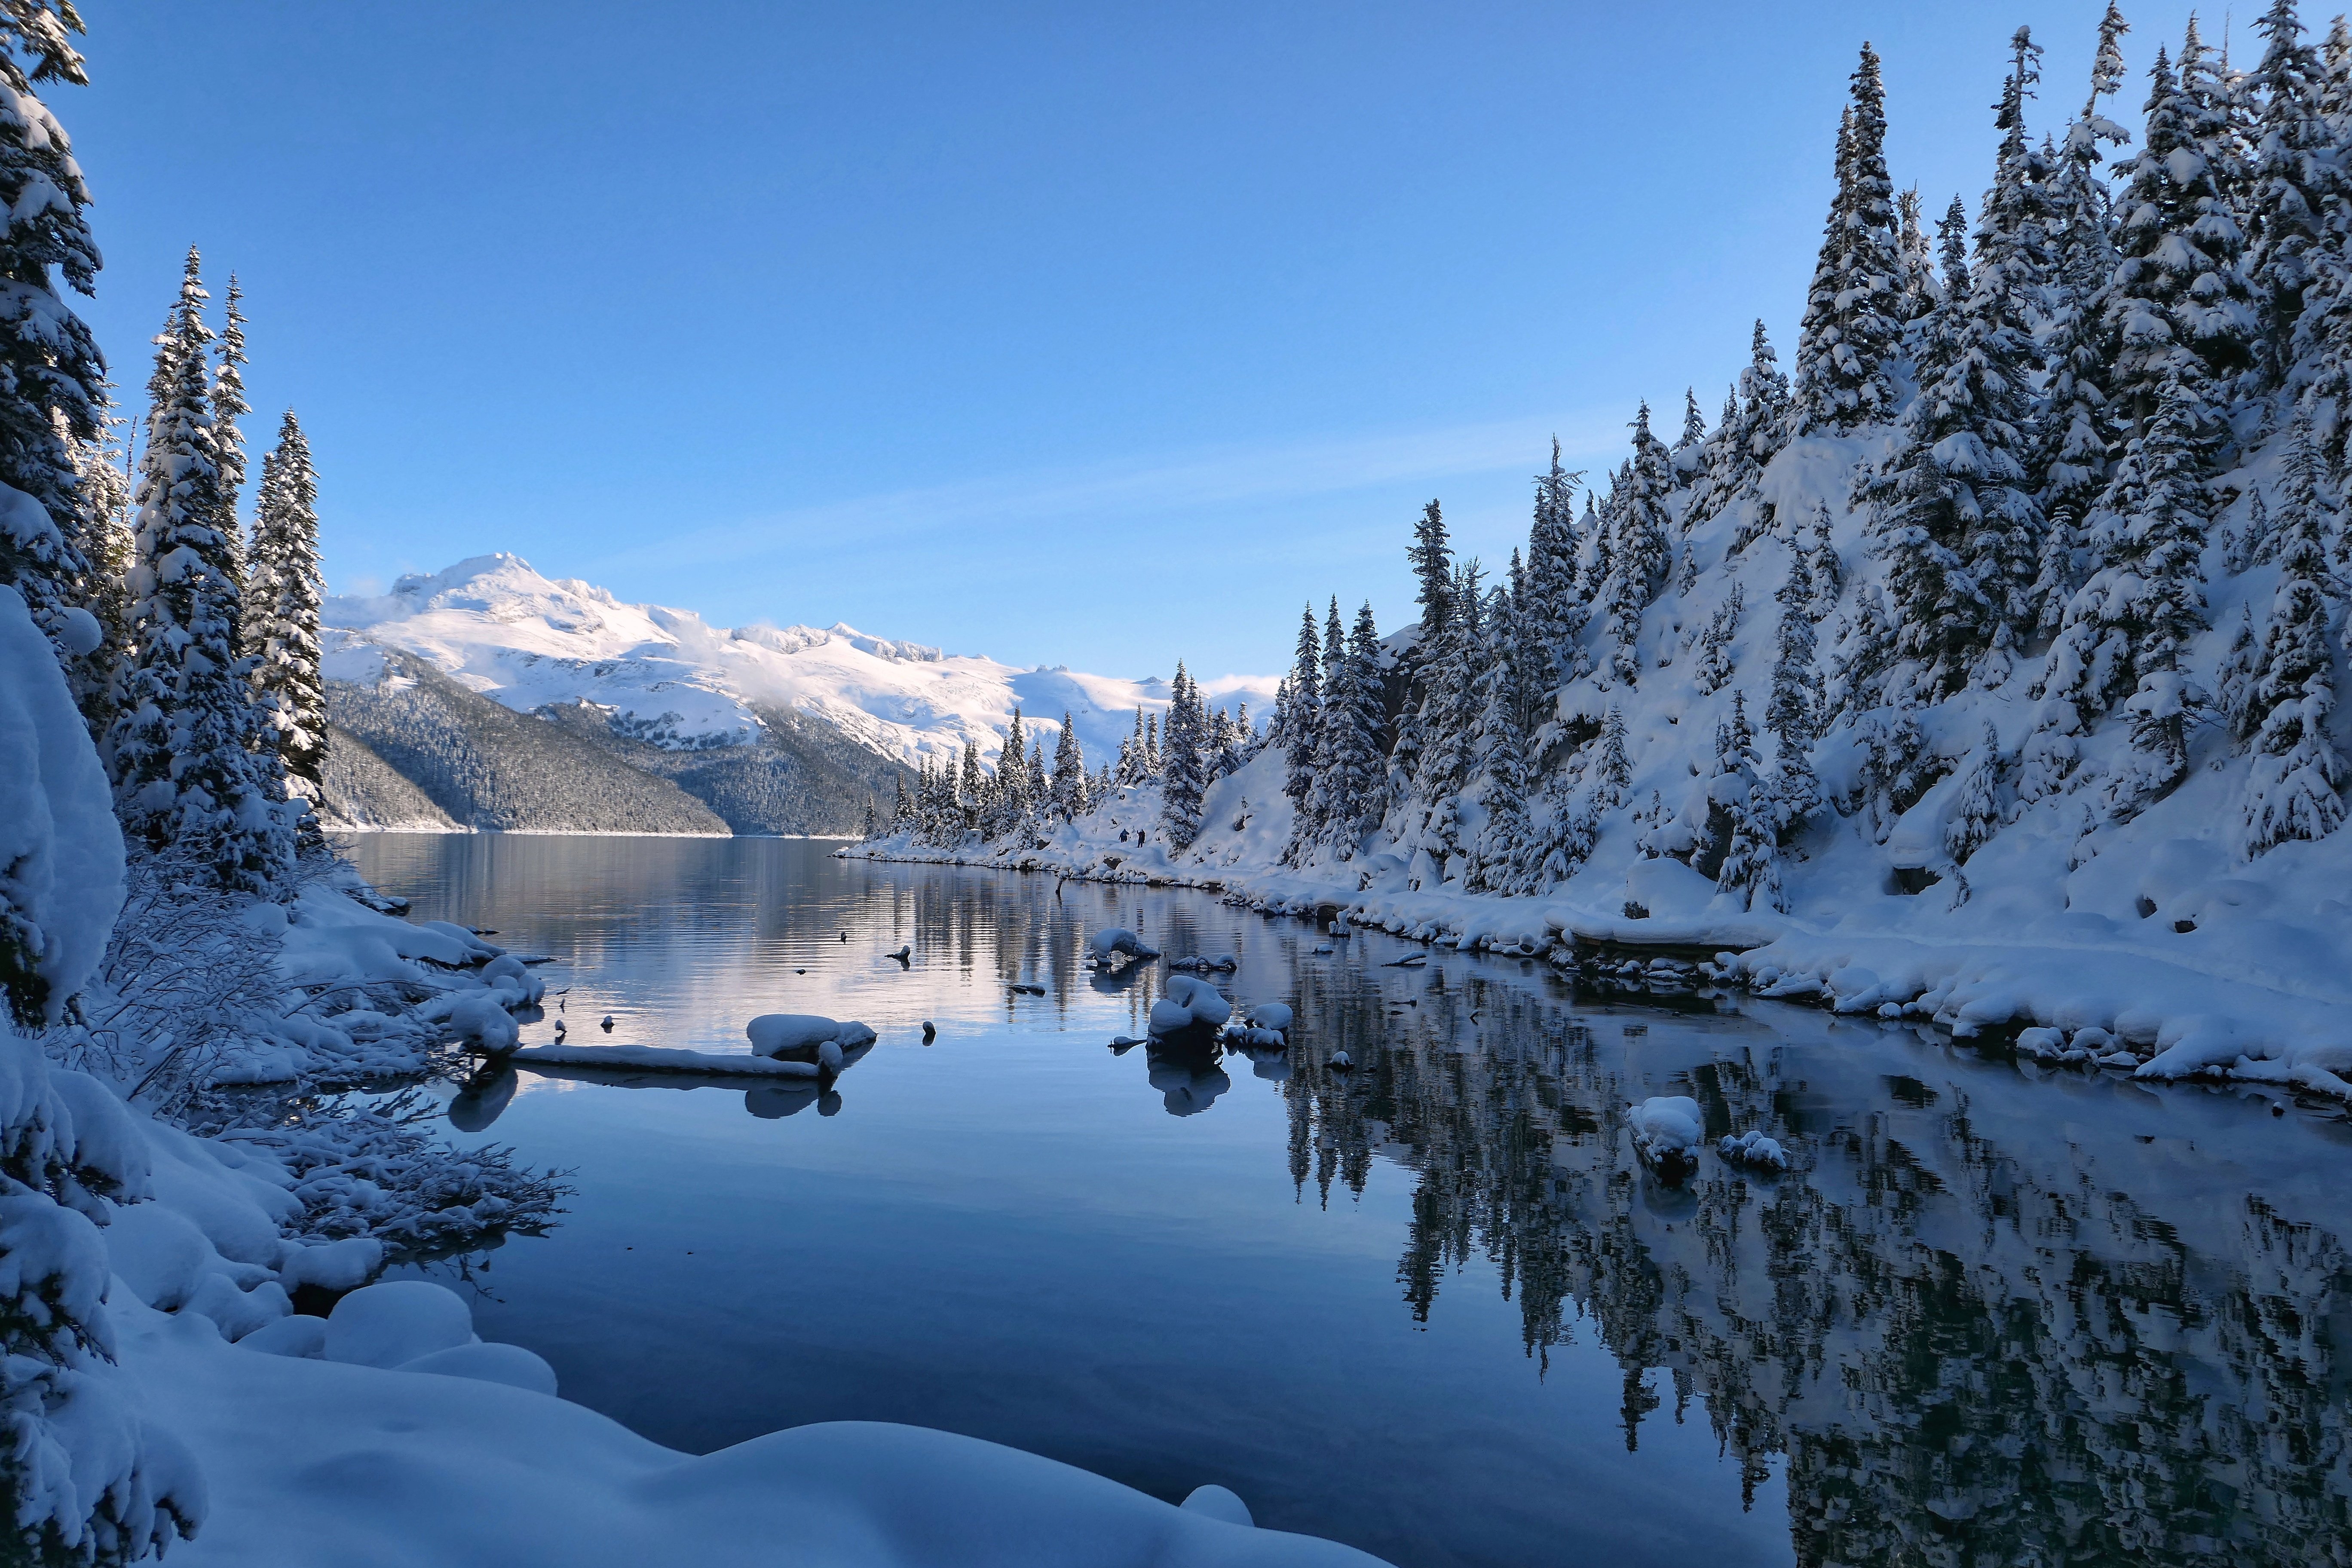 Clear skies over a lake with snowy shores